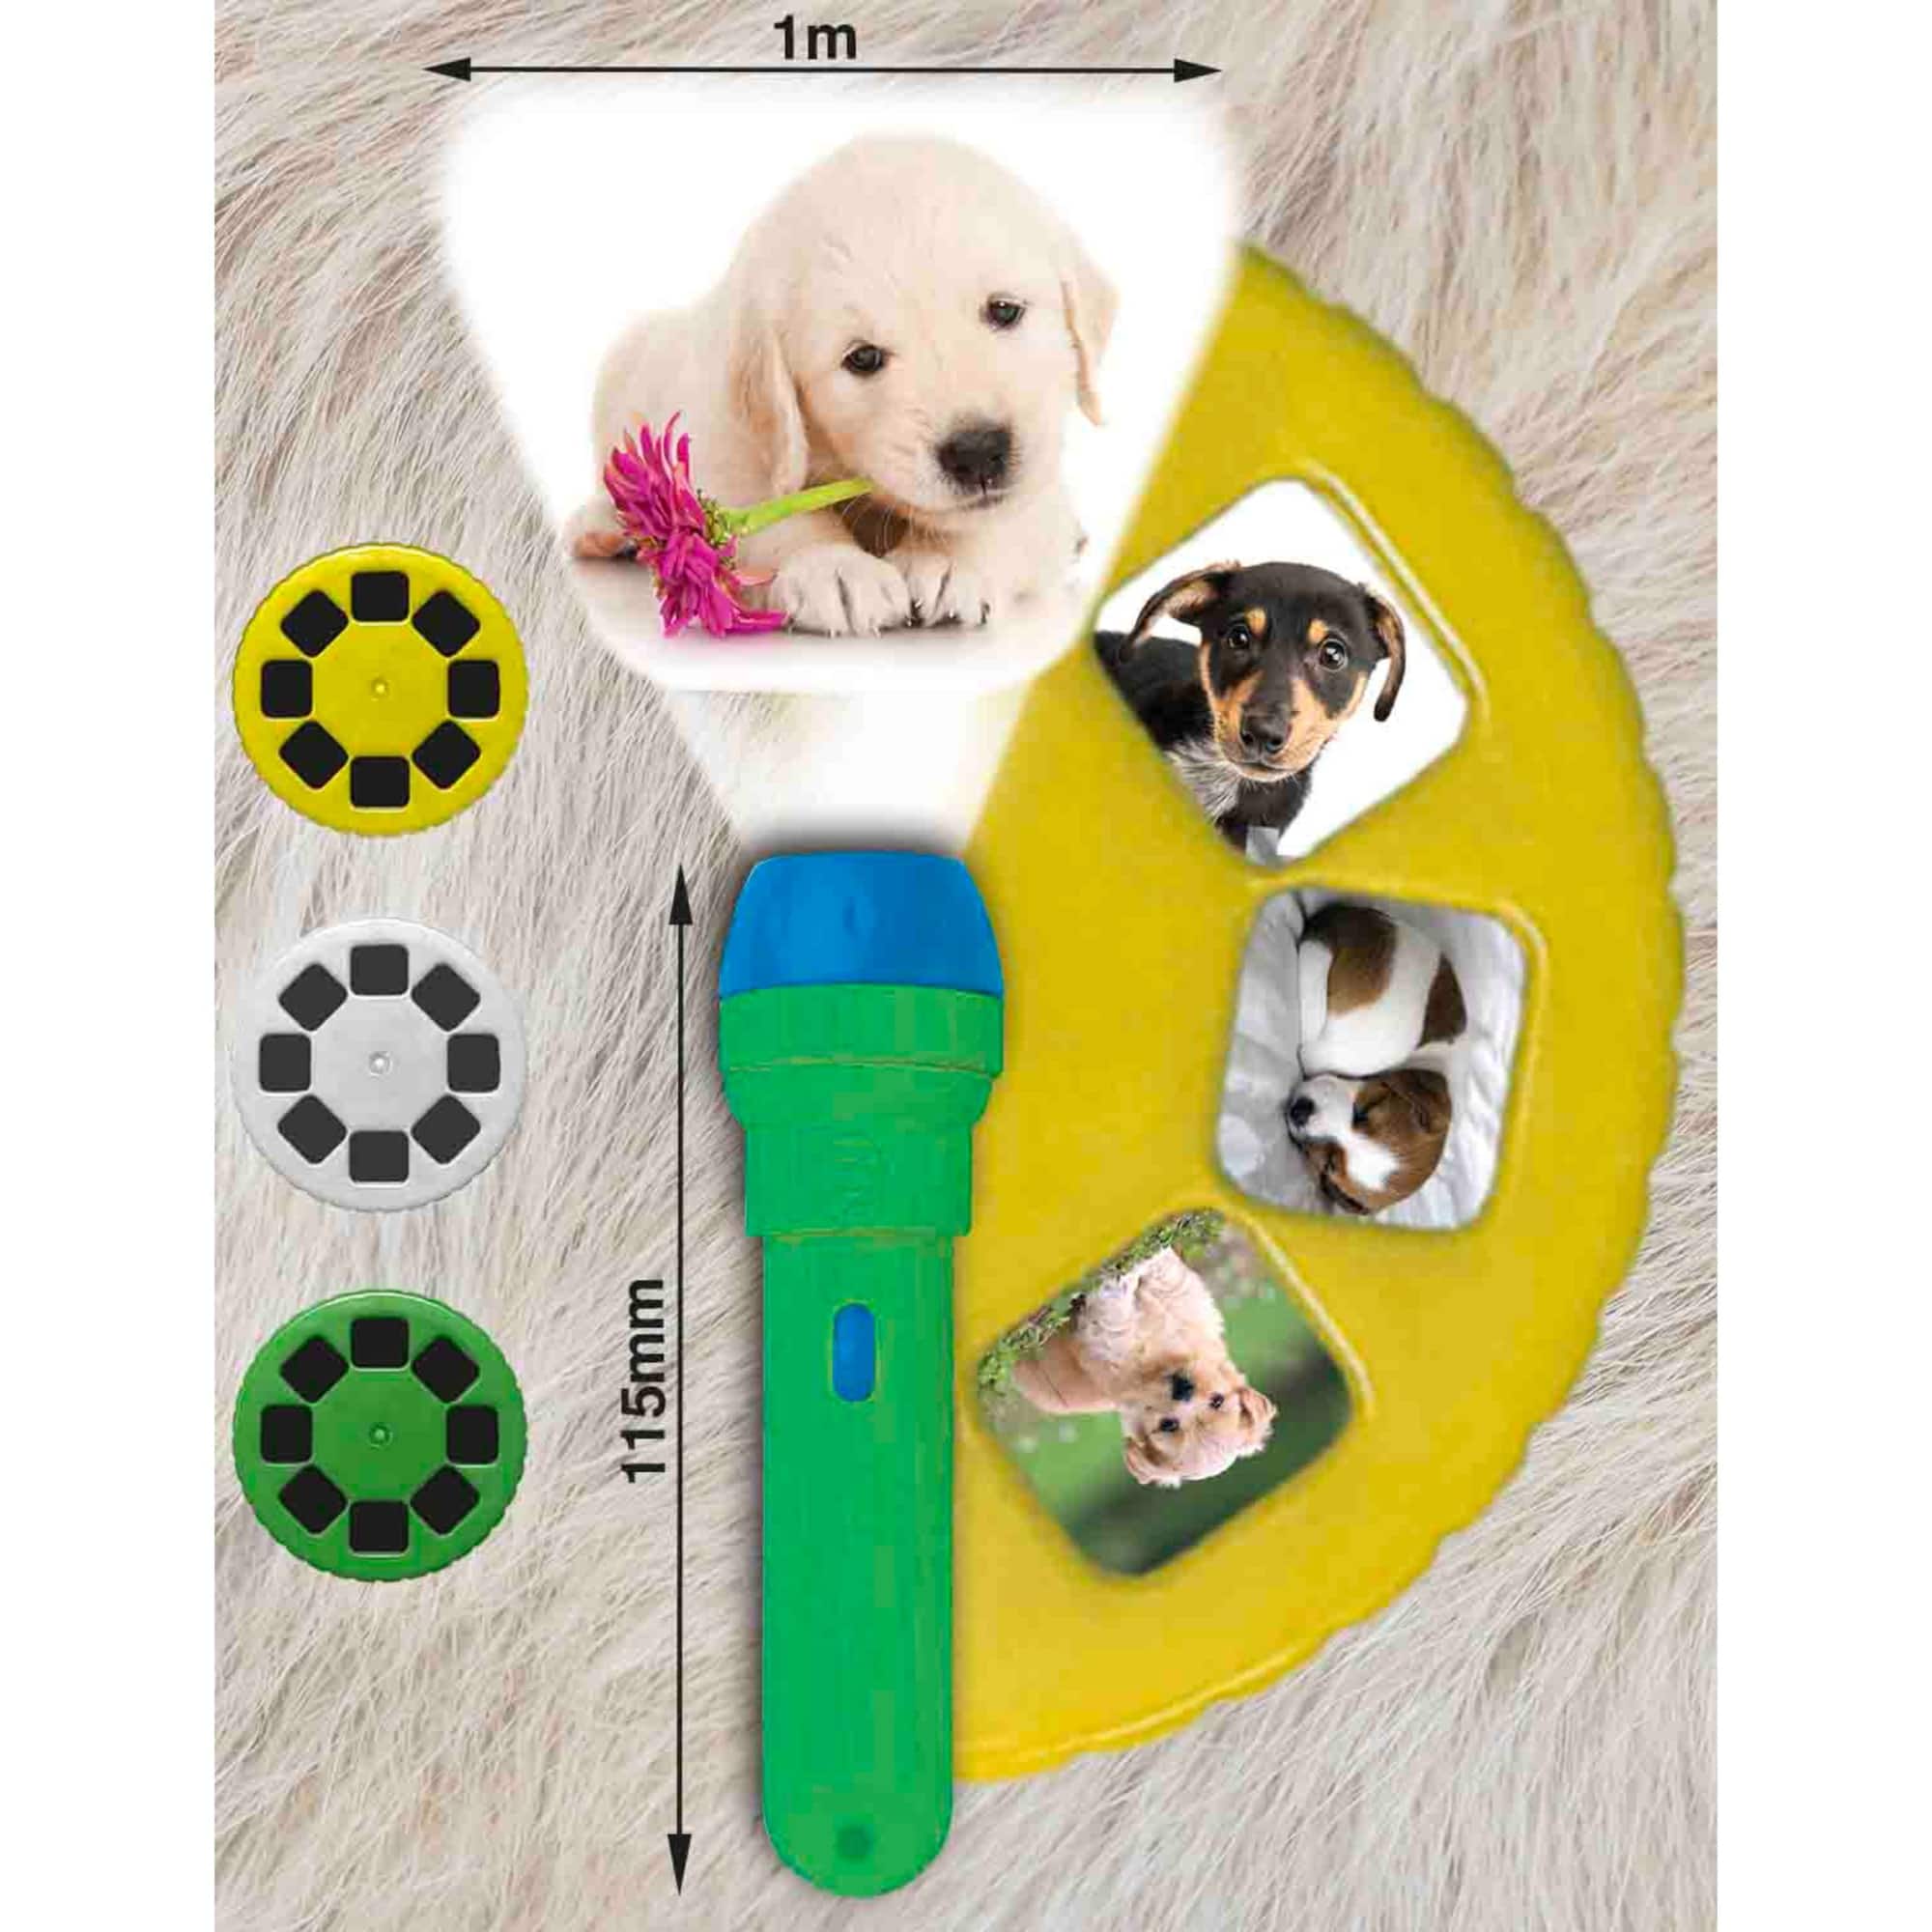 Brainstorm Toys Puppies Torch &#x26; Projector